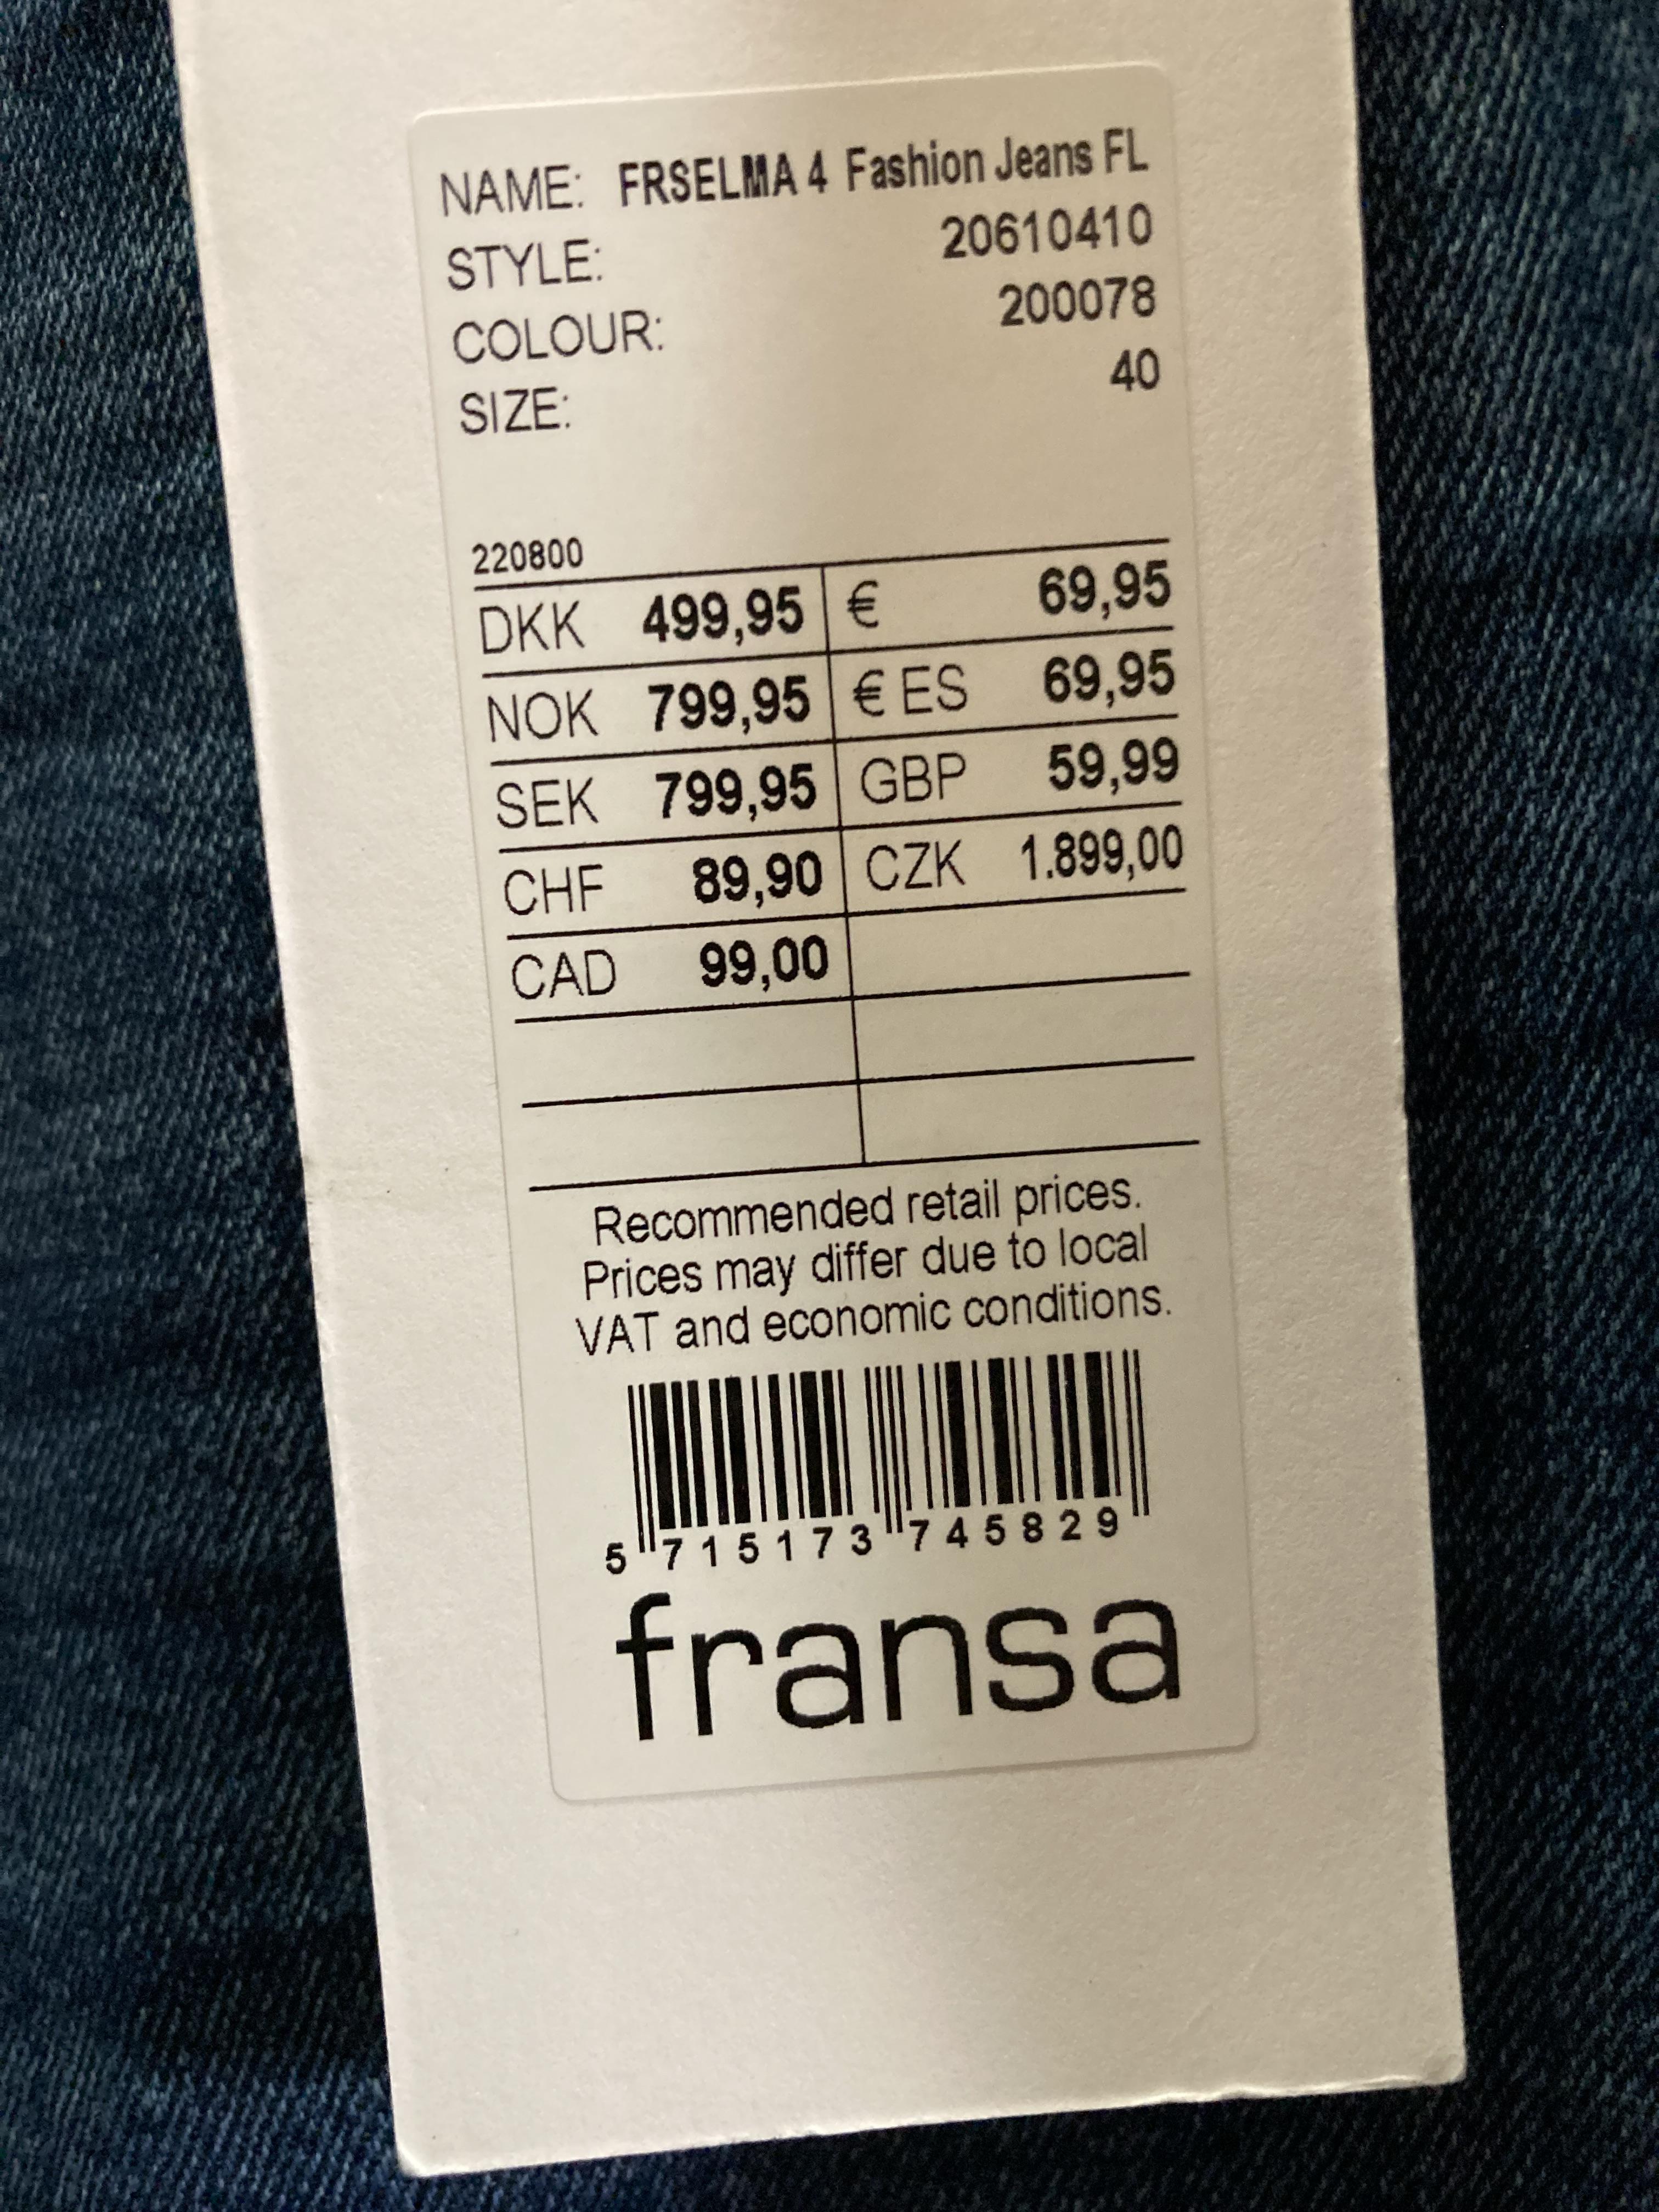 2 x Pairs of FRANSA ladies denim jeans - sizes 40 and 42 - RRP: £59. - Image 3 of 3